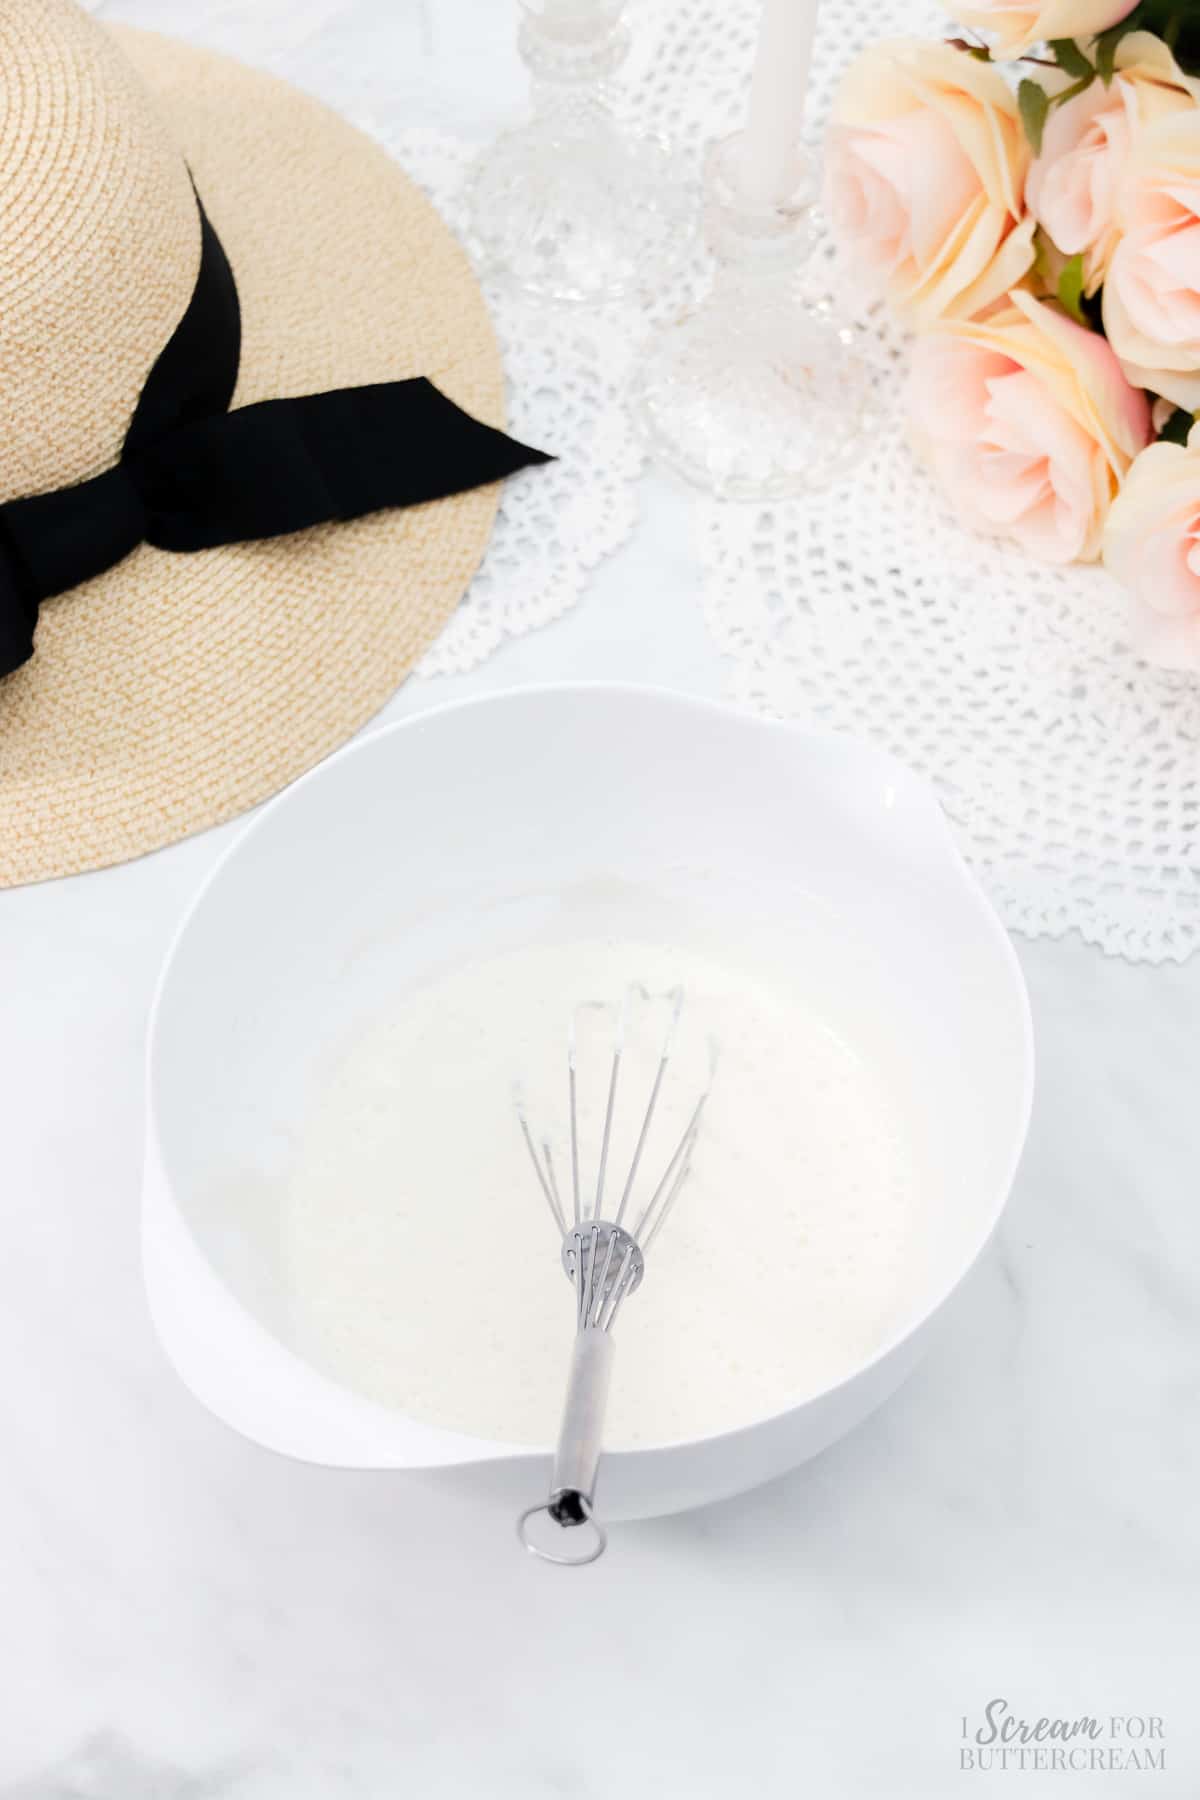 Liquid cake batter ingredients in a white bowl with a whisk.